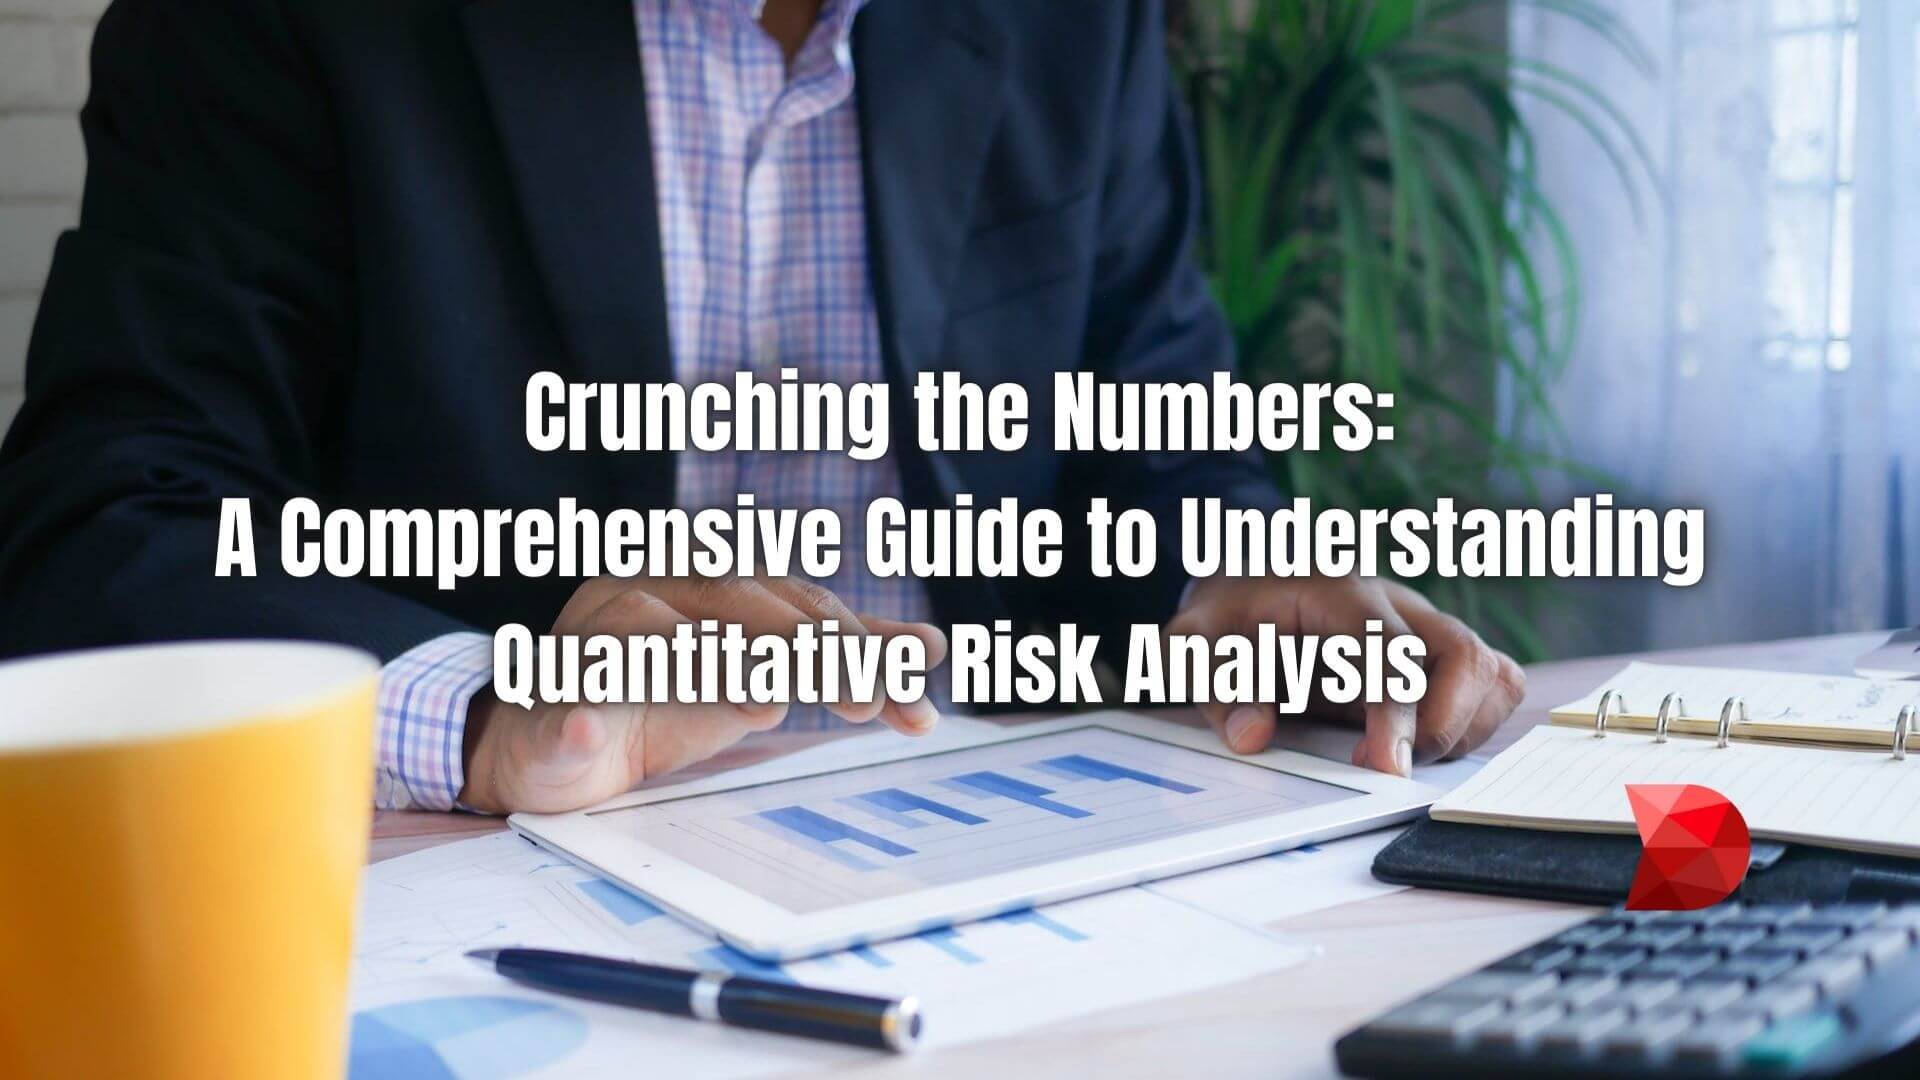 Unlock the power of quantitative risk analysis with this comprehensive guide. Learn the key strategies for informed decision-making today!